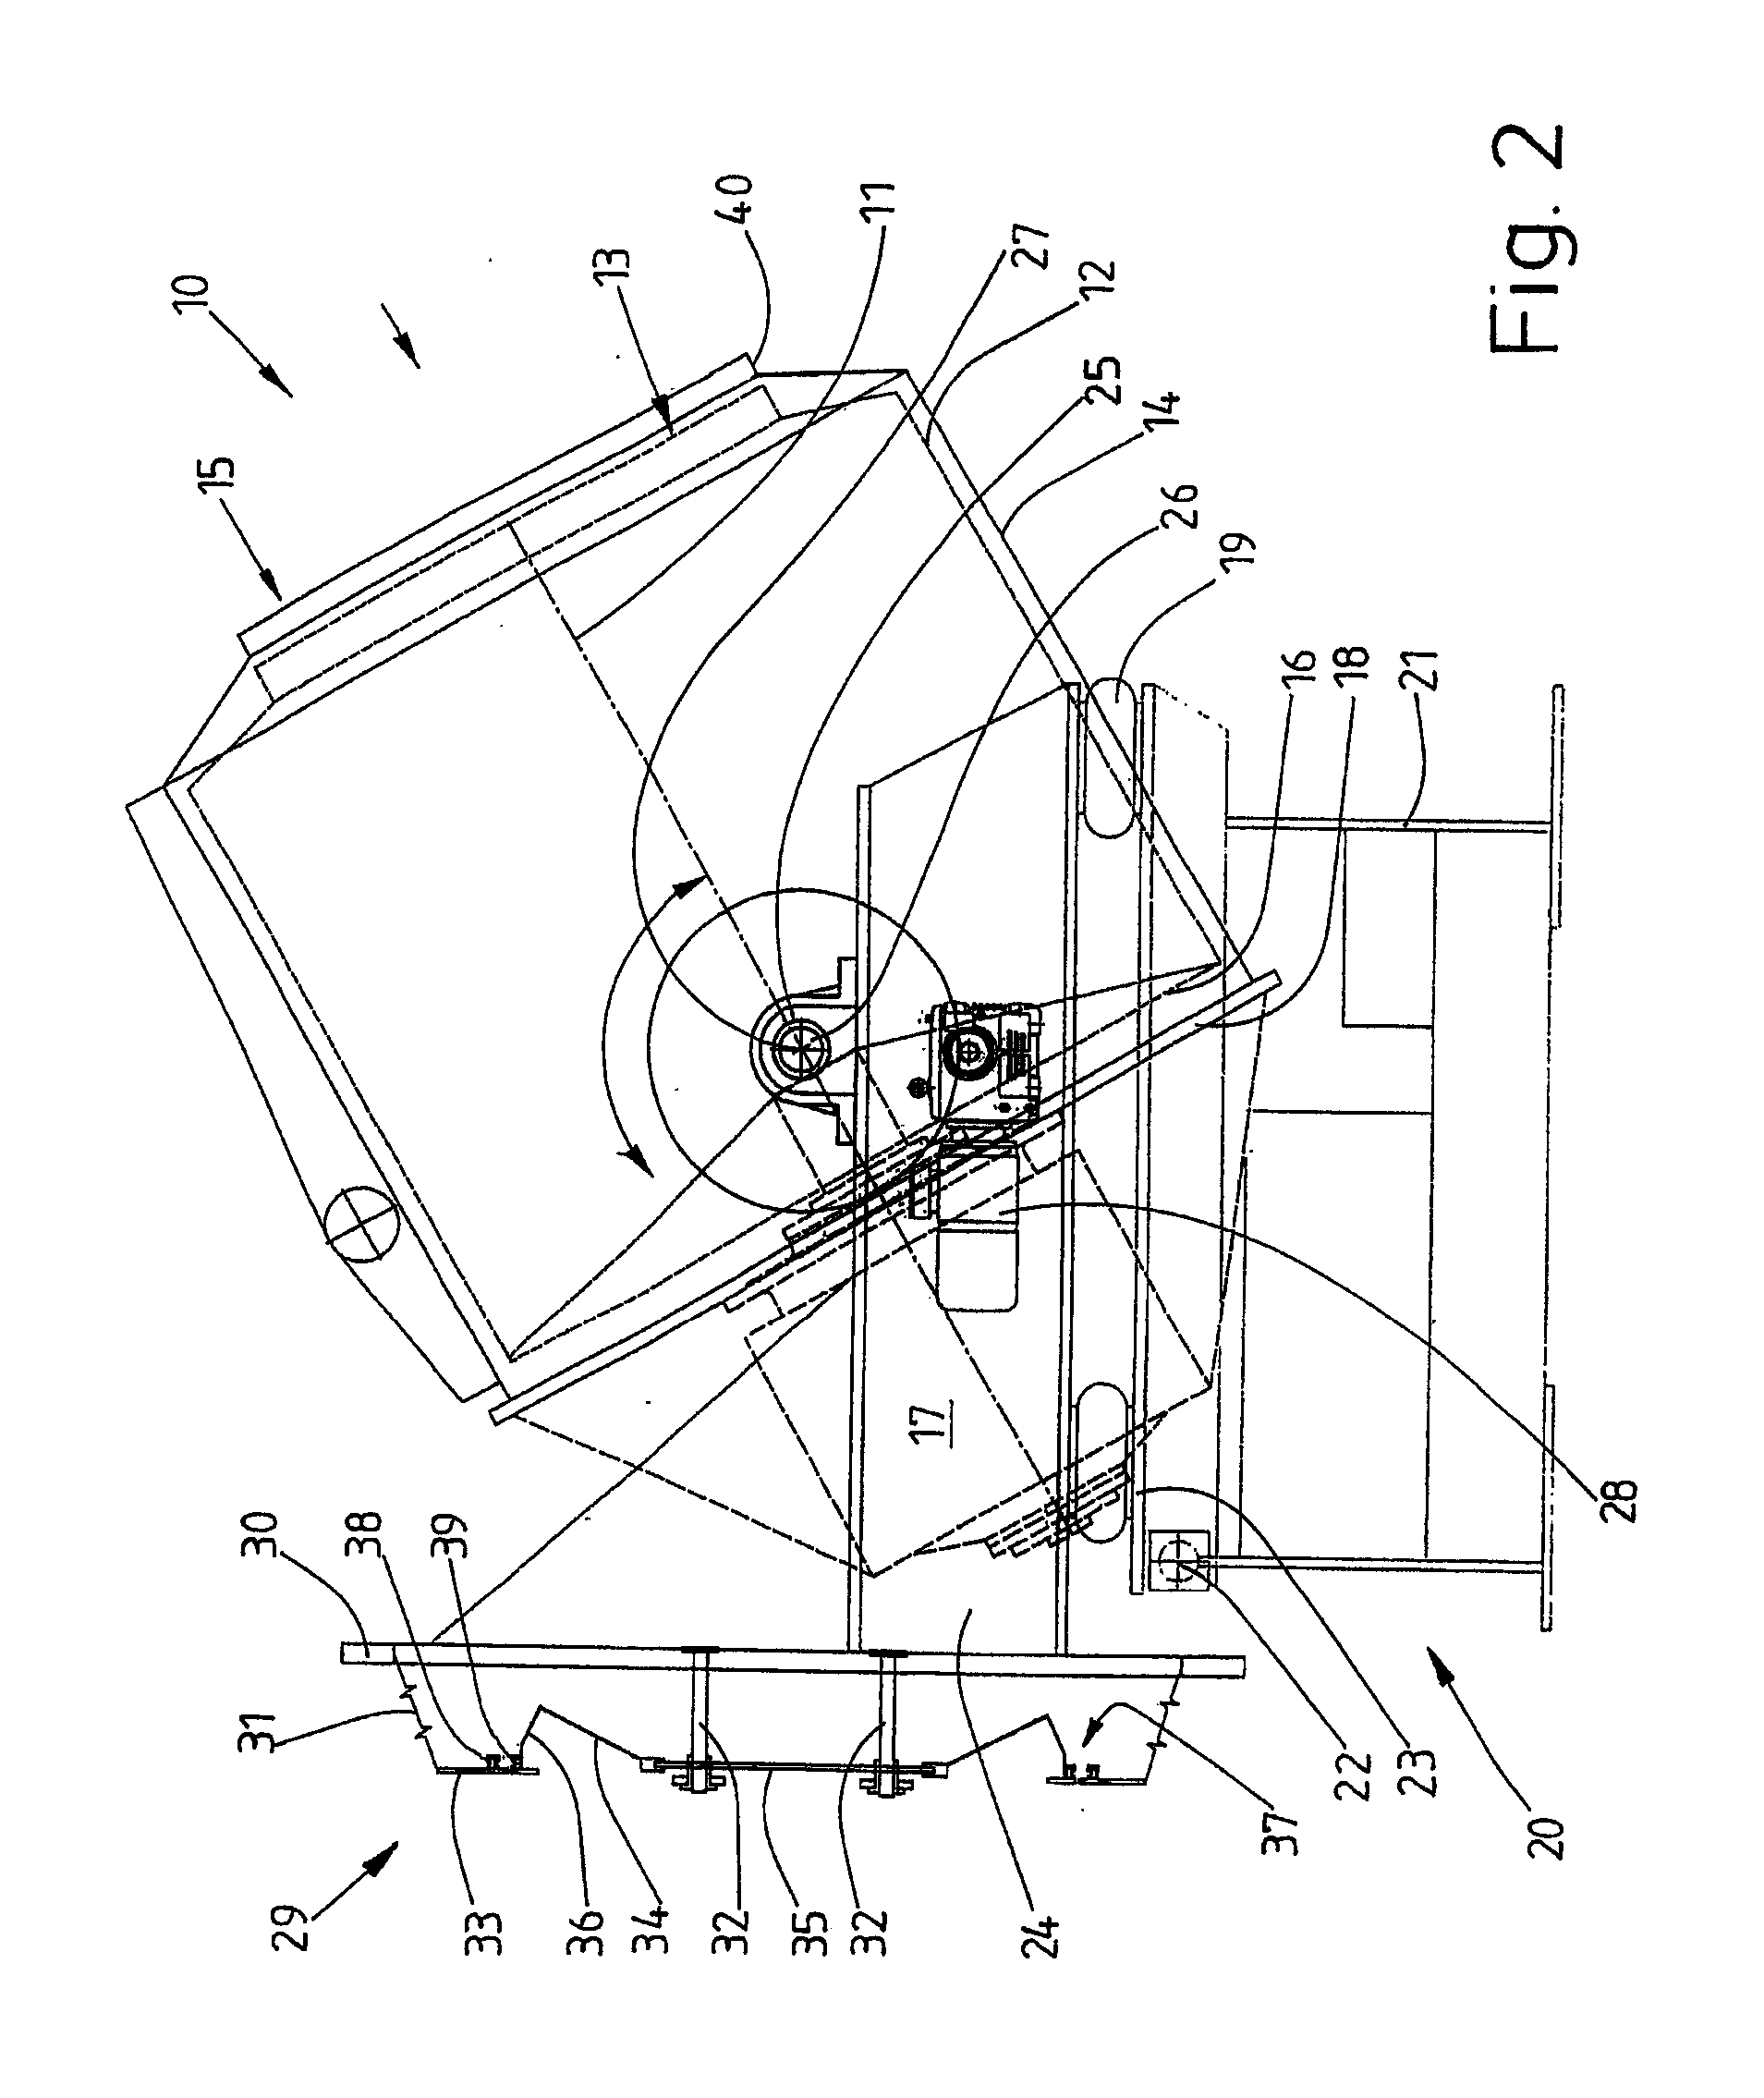 Device and method for wet treating laundry